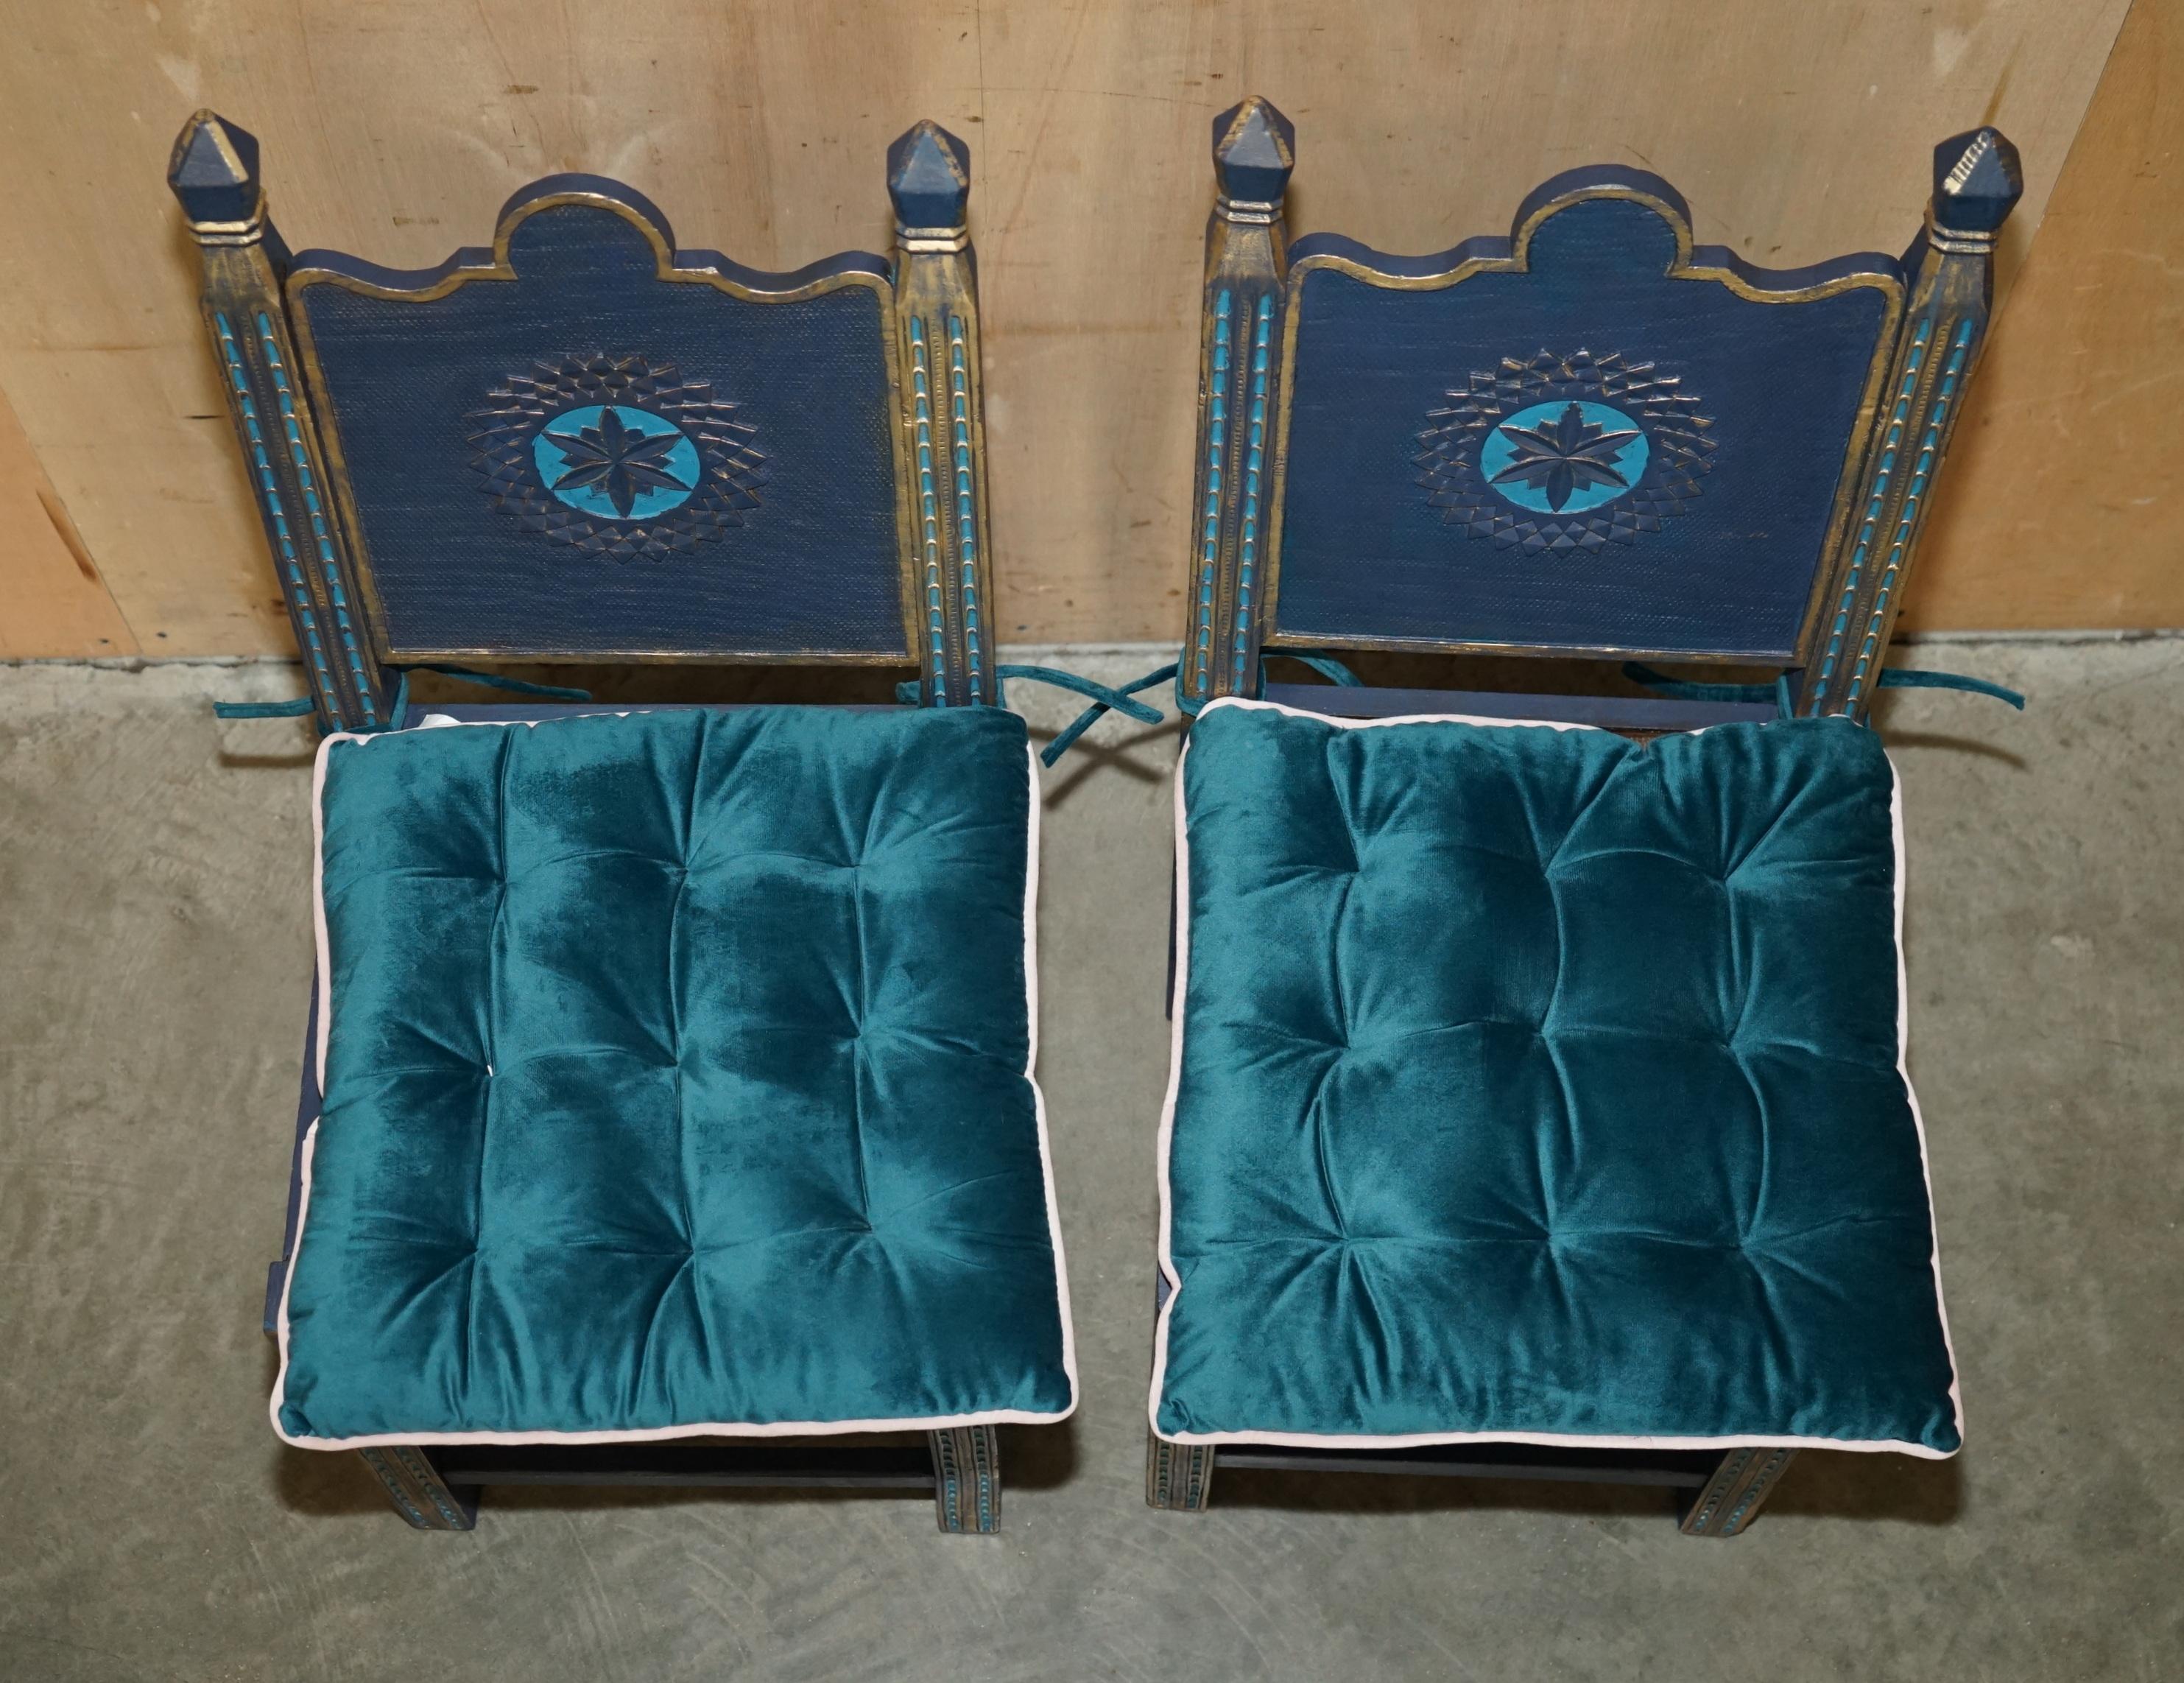 SUITE OF THREE HIGH SEAT HAND PAINTED SiDE CHAIRS IN THE GOTHIC REVIval TASTE im Angebot 8